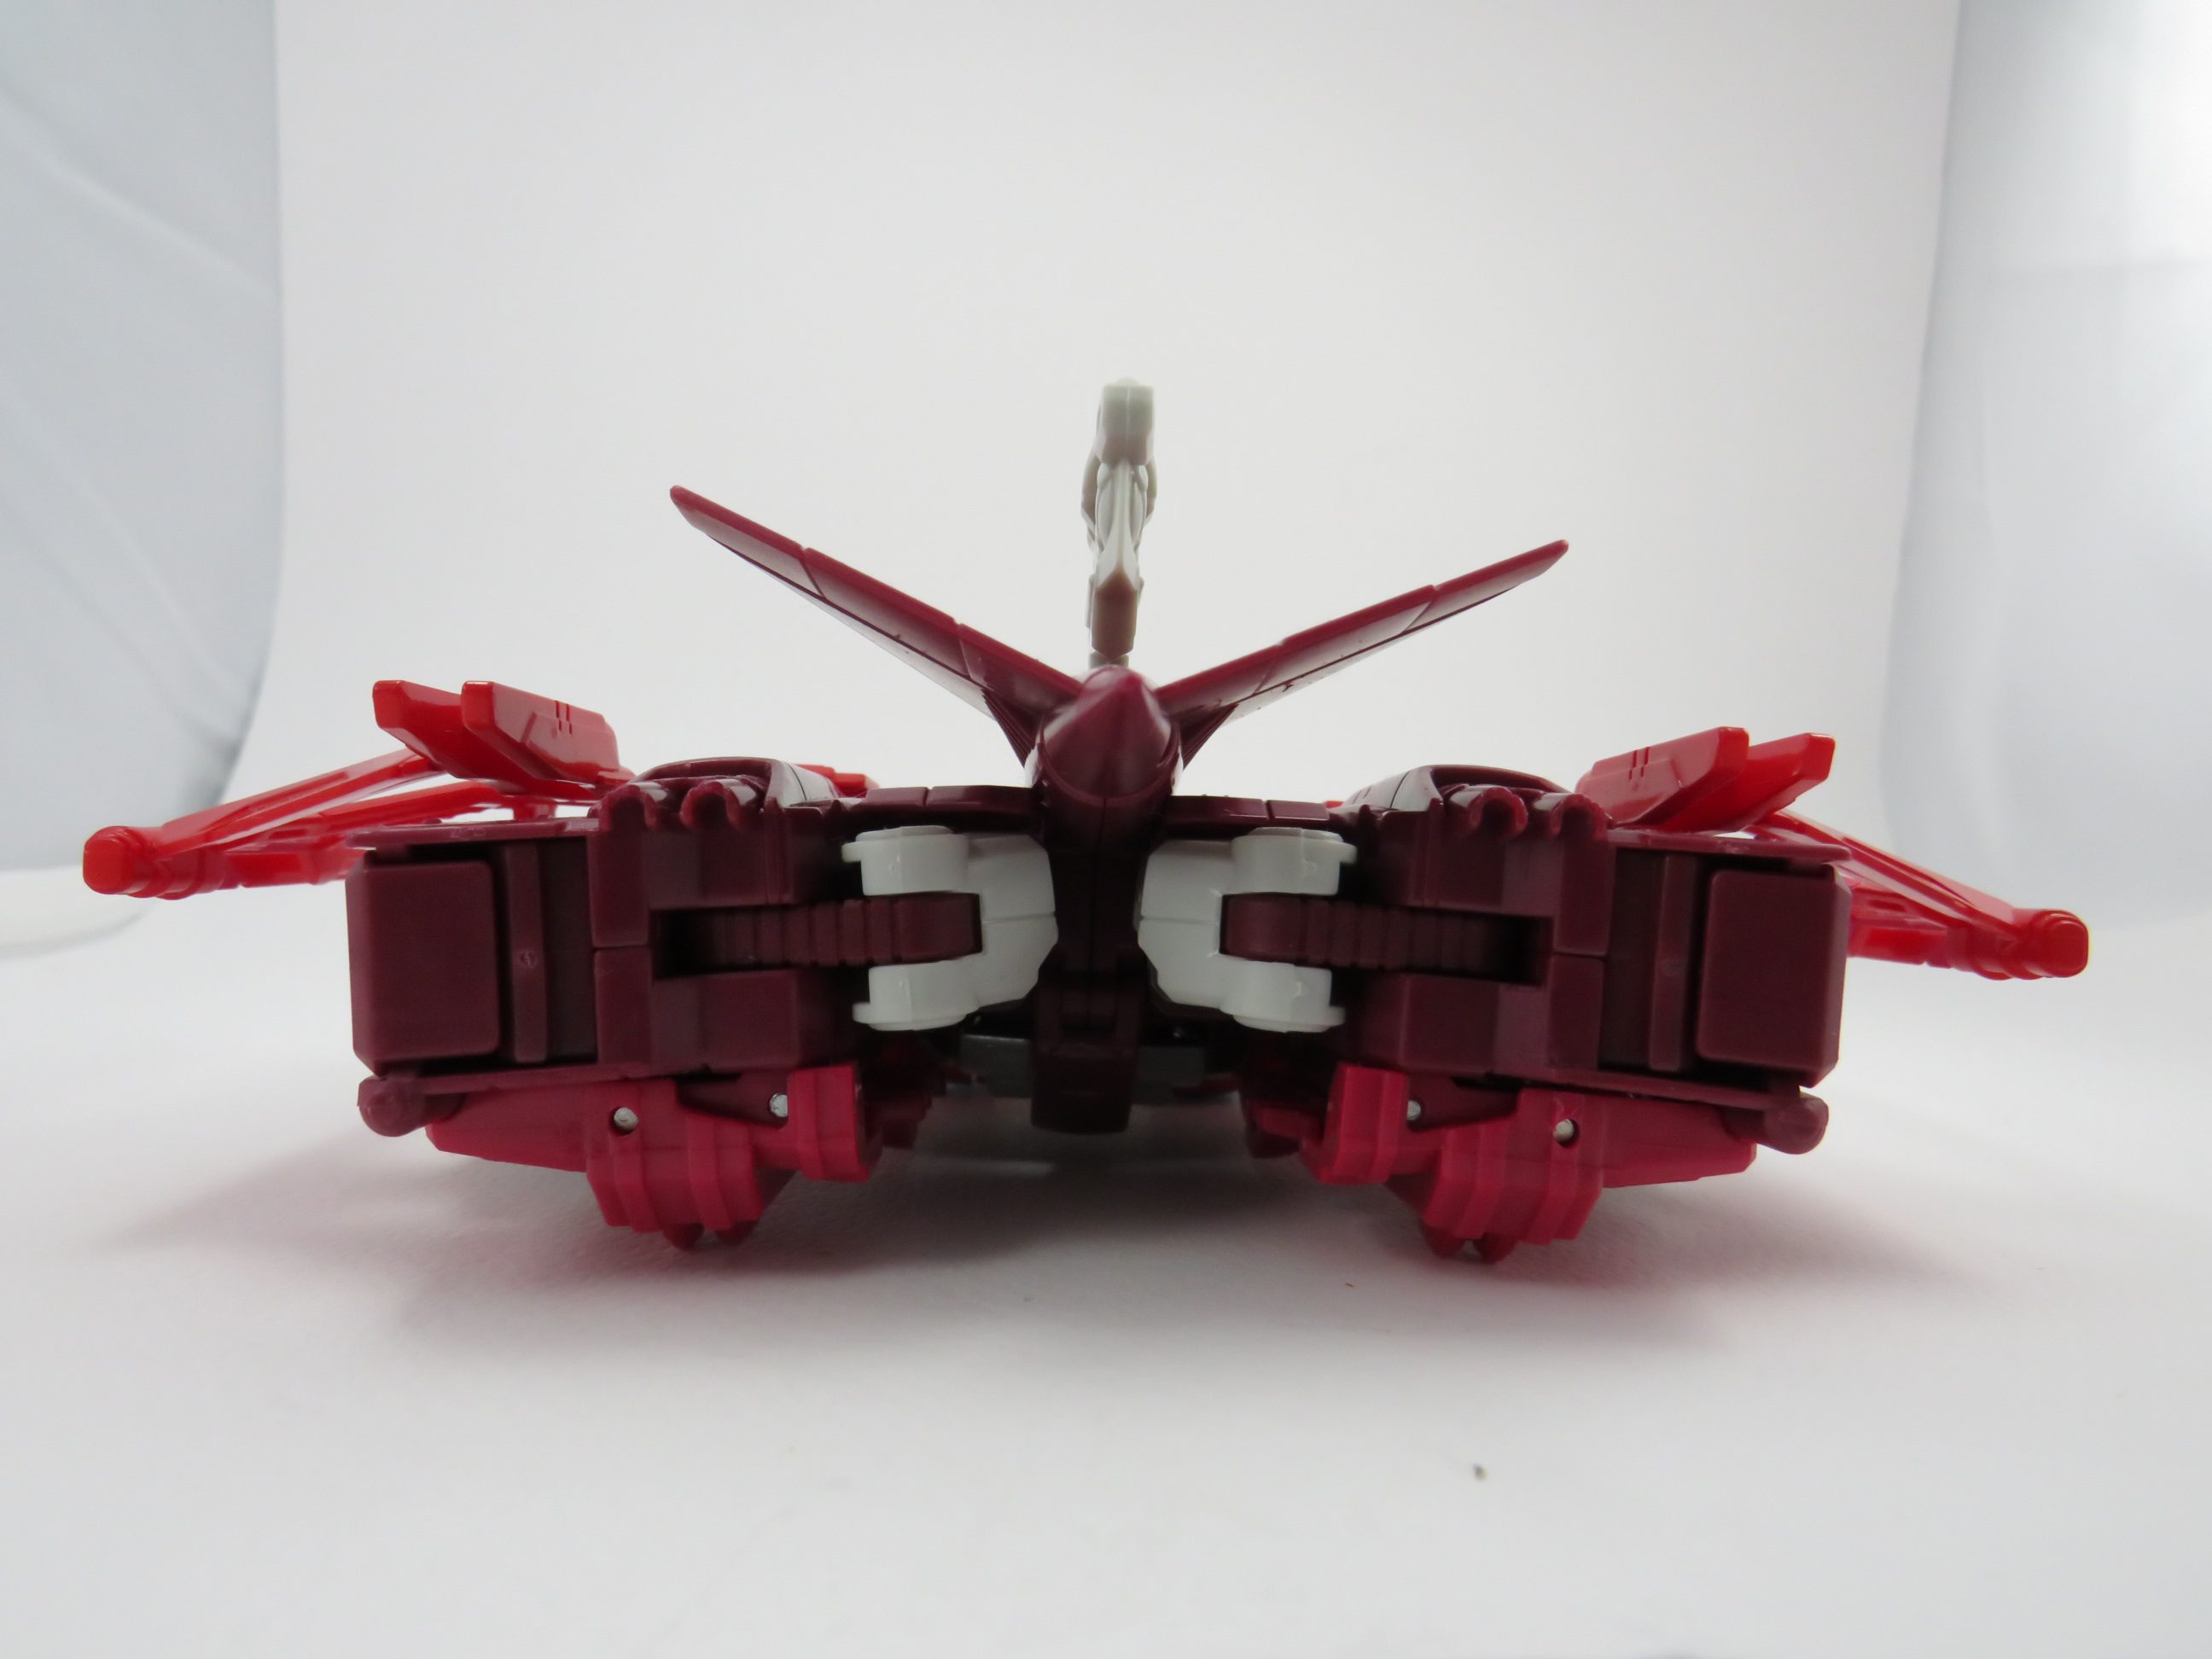 Alternate mode. (Scattershot from the Computron gift set)